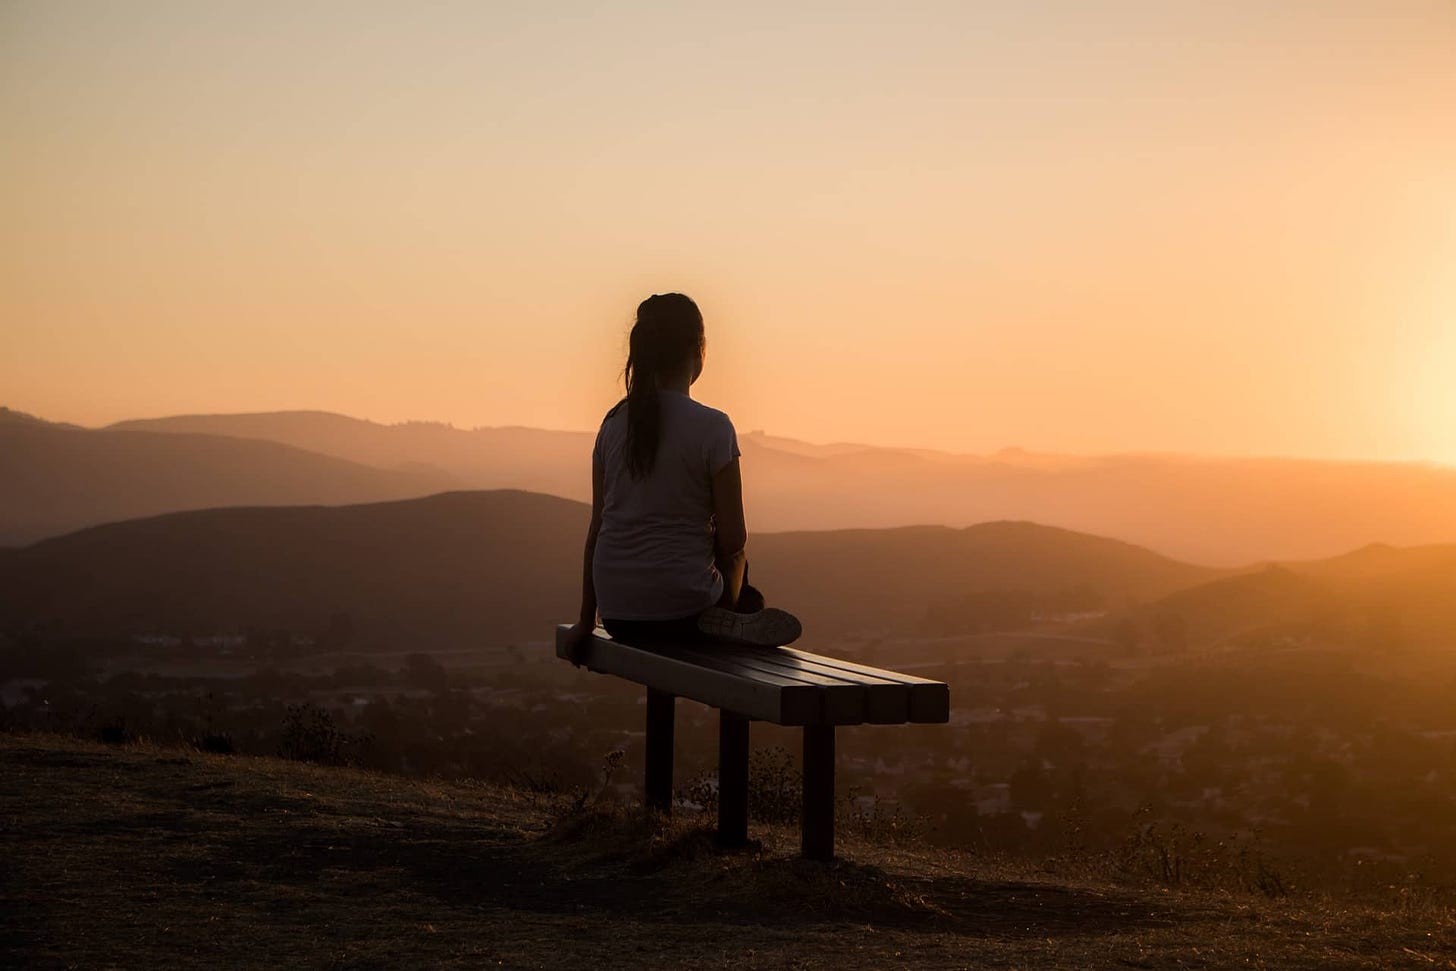 An image relating to creating a decision ritual. It's a woman sitting on a park bench overlooking a city during sunrise.